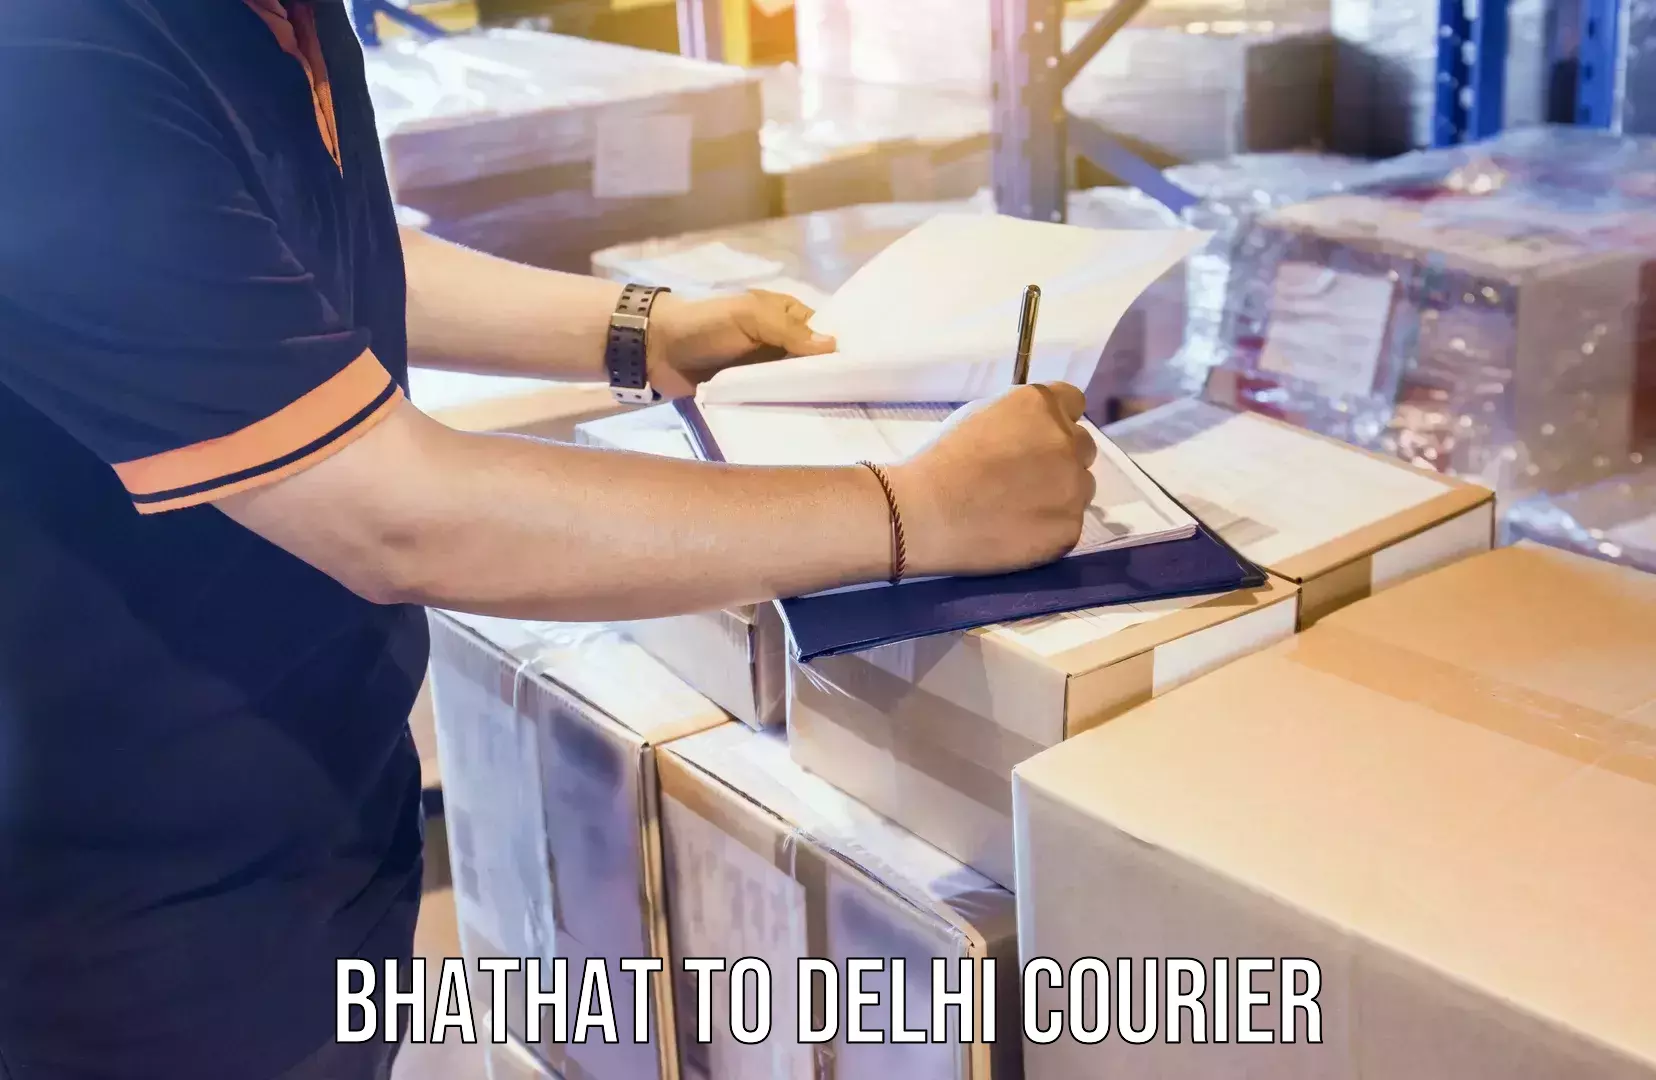 Express mail solutions Bhathat to Delhi